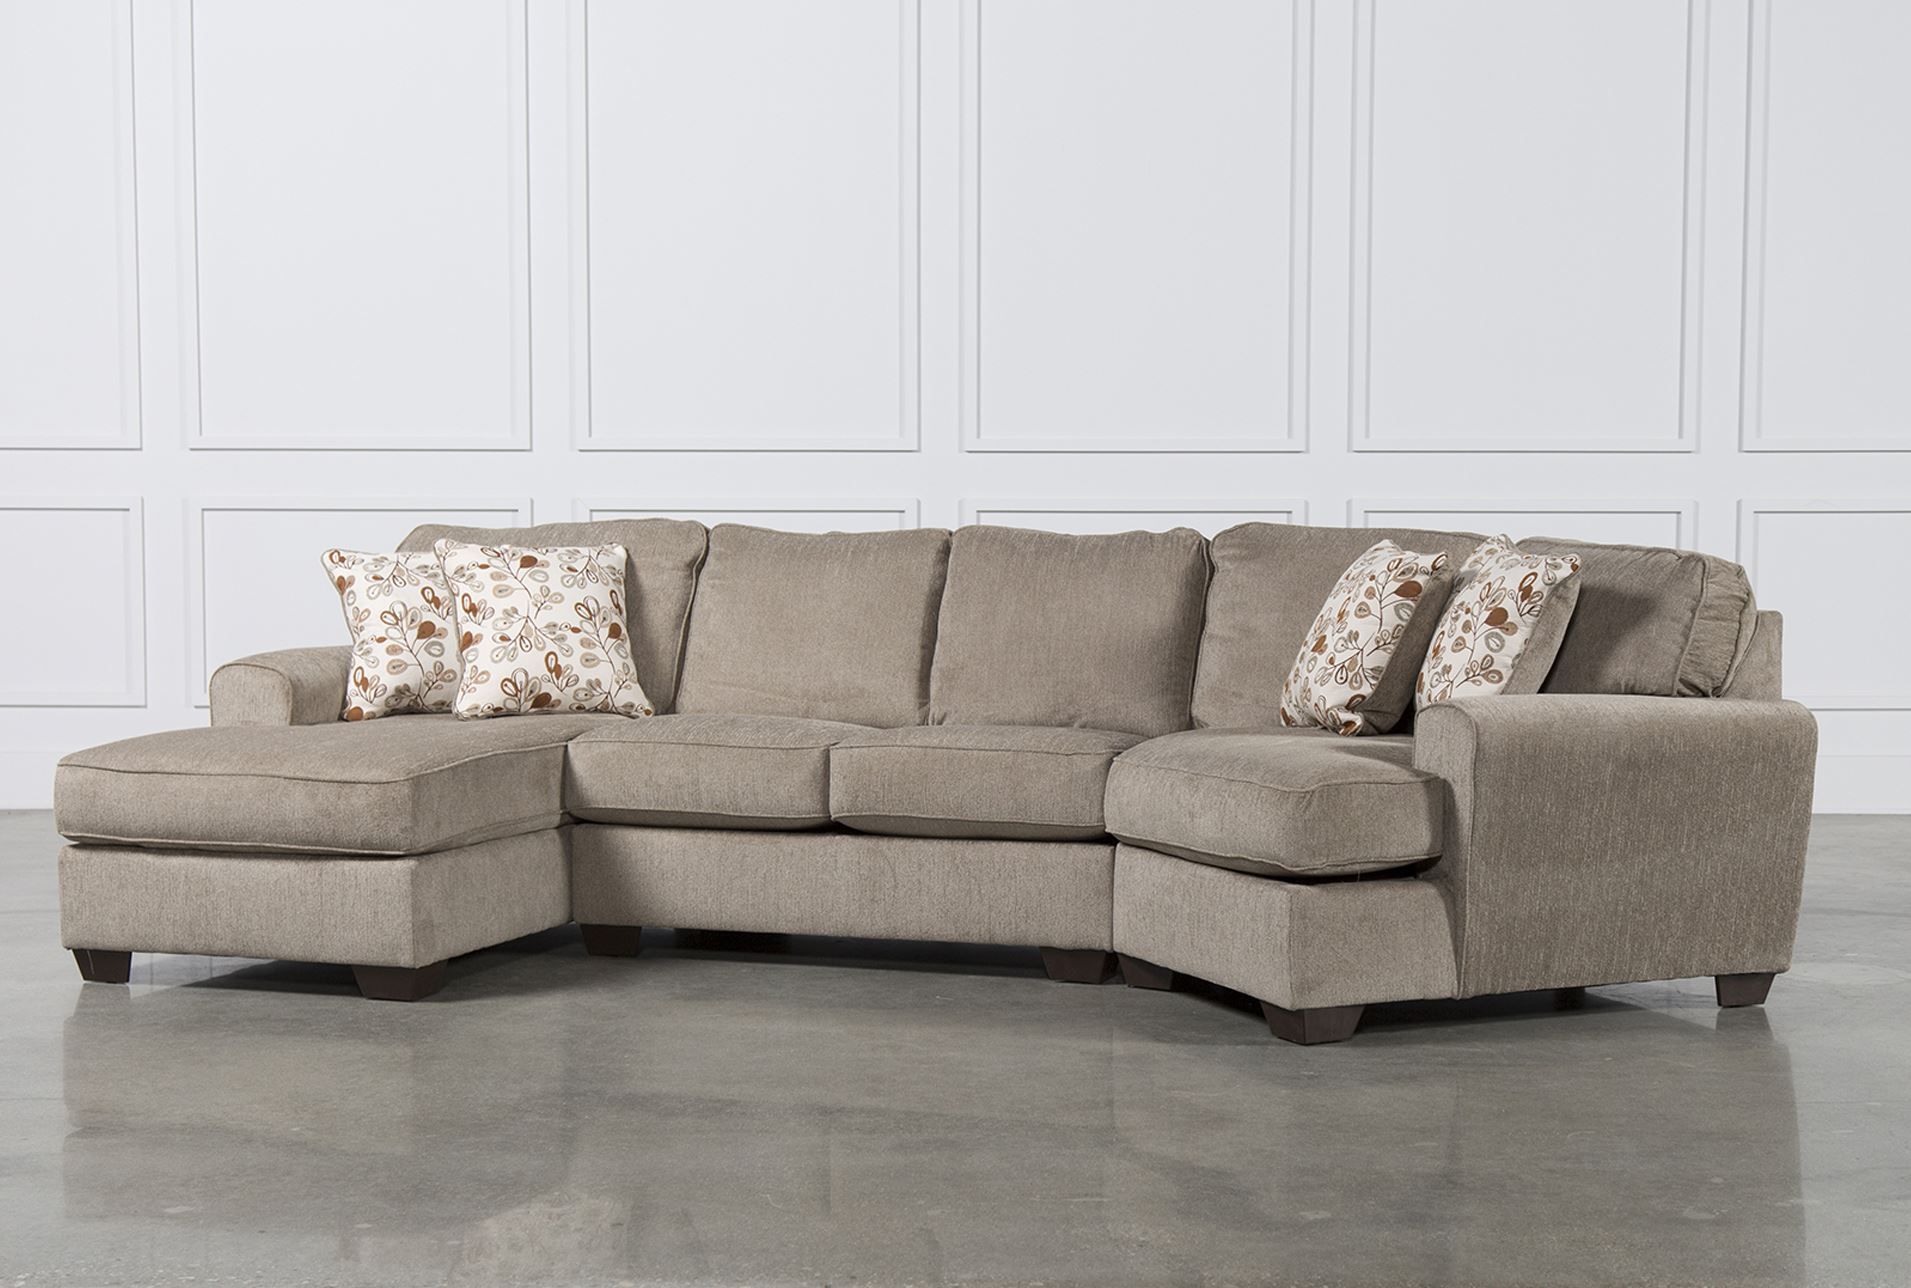 Cuddler Sectional Sofa Carena 2 Pc Fabric Sectional Sofa With Regard To Hannah Right Sectional Sofas (View 6 of 15)